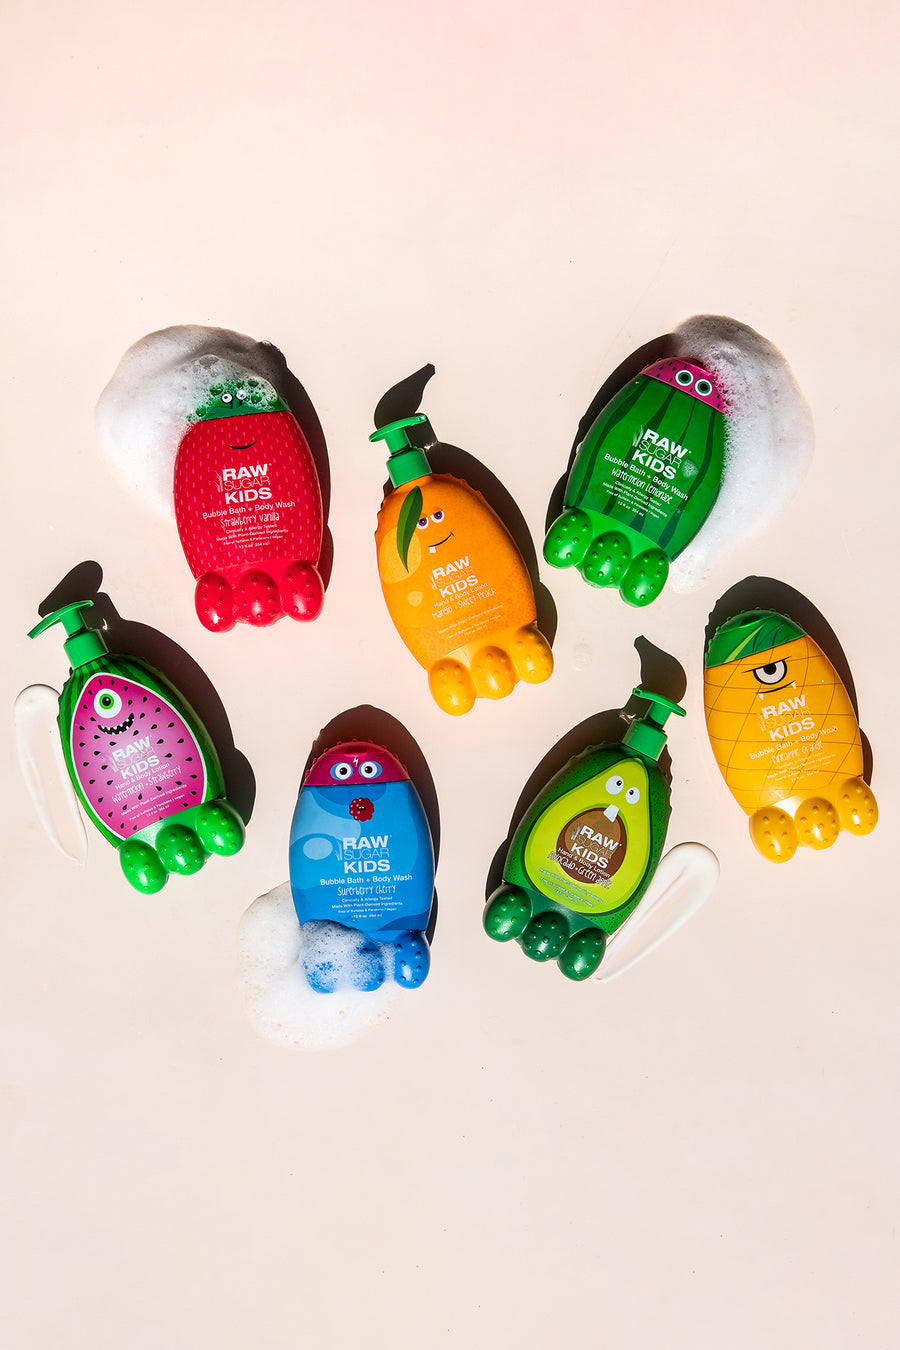 Group of Raw Sugar Kids colorful Monster products